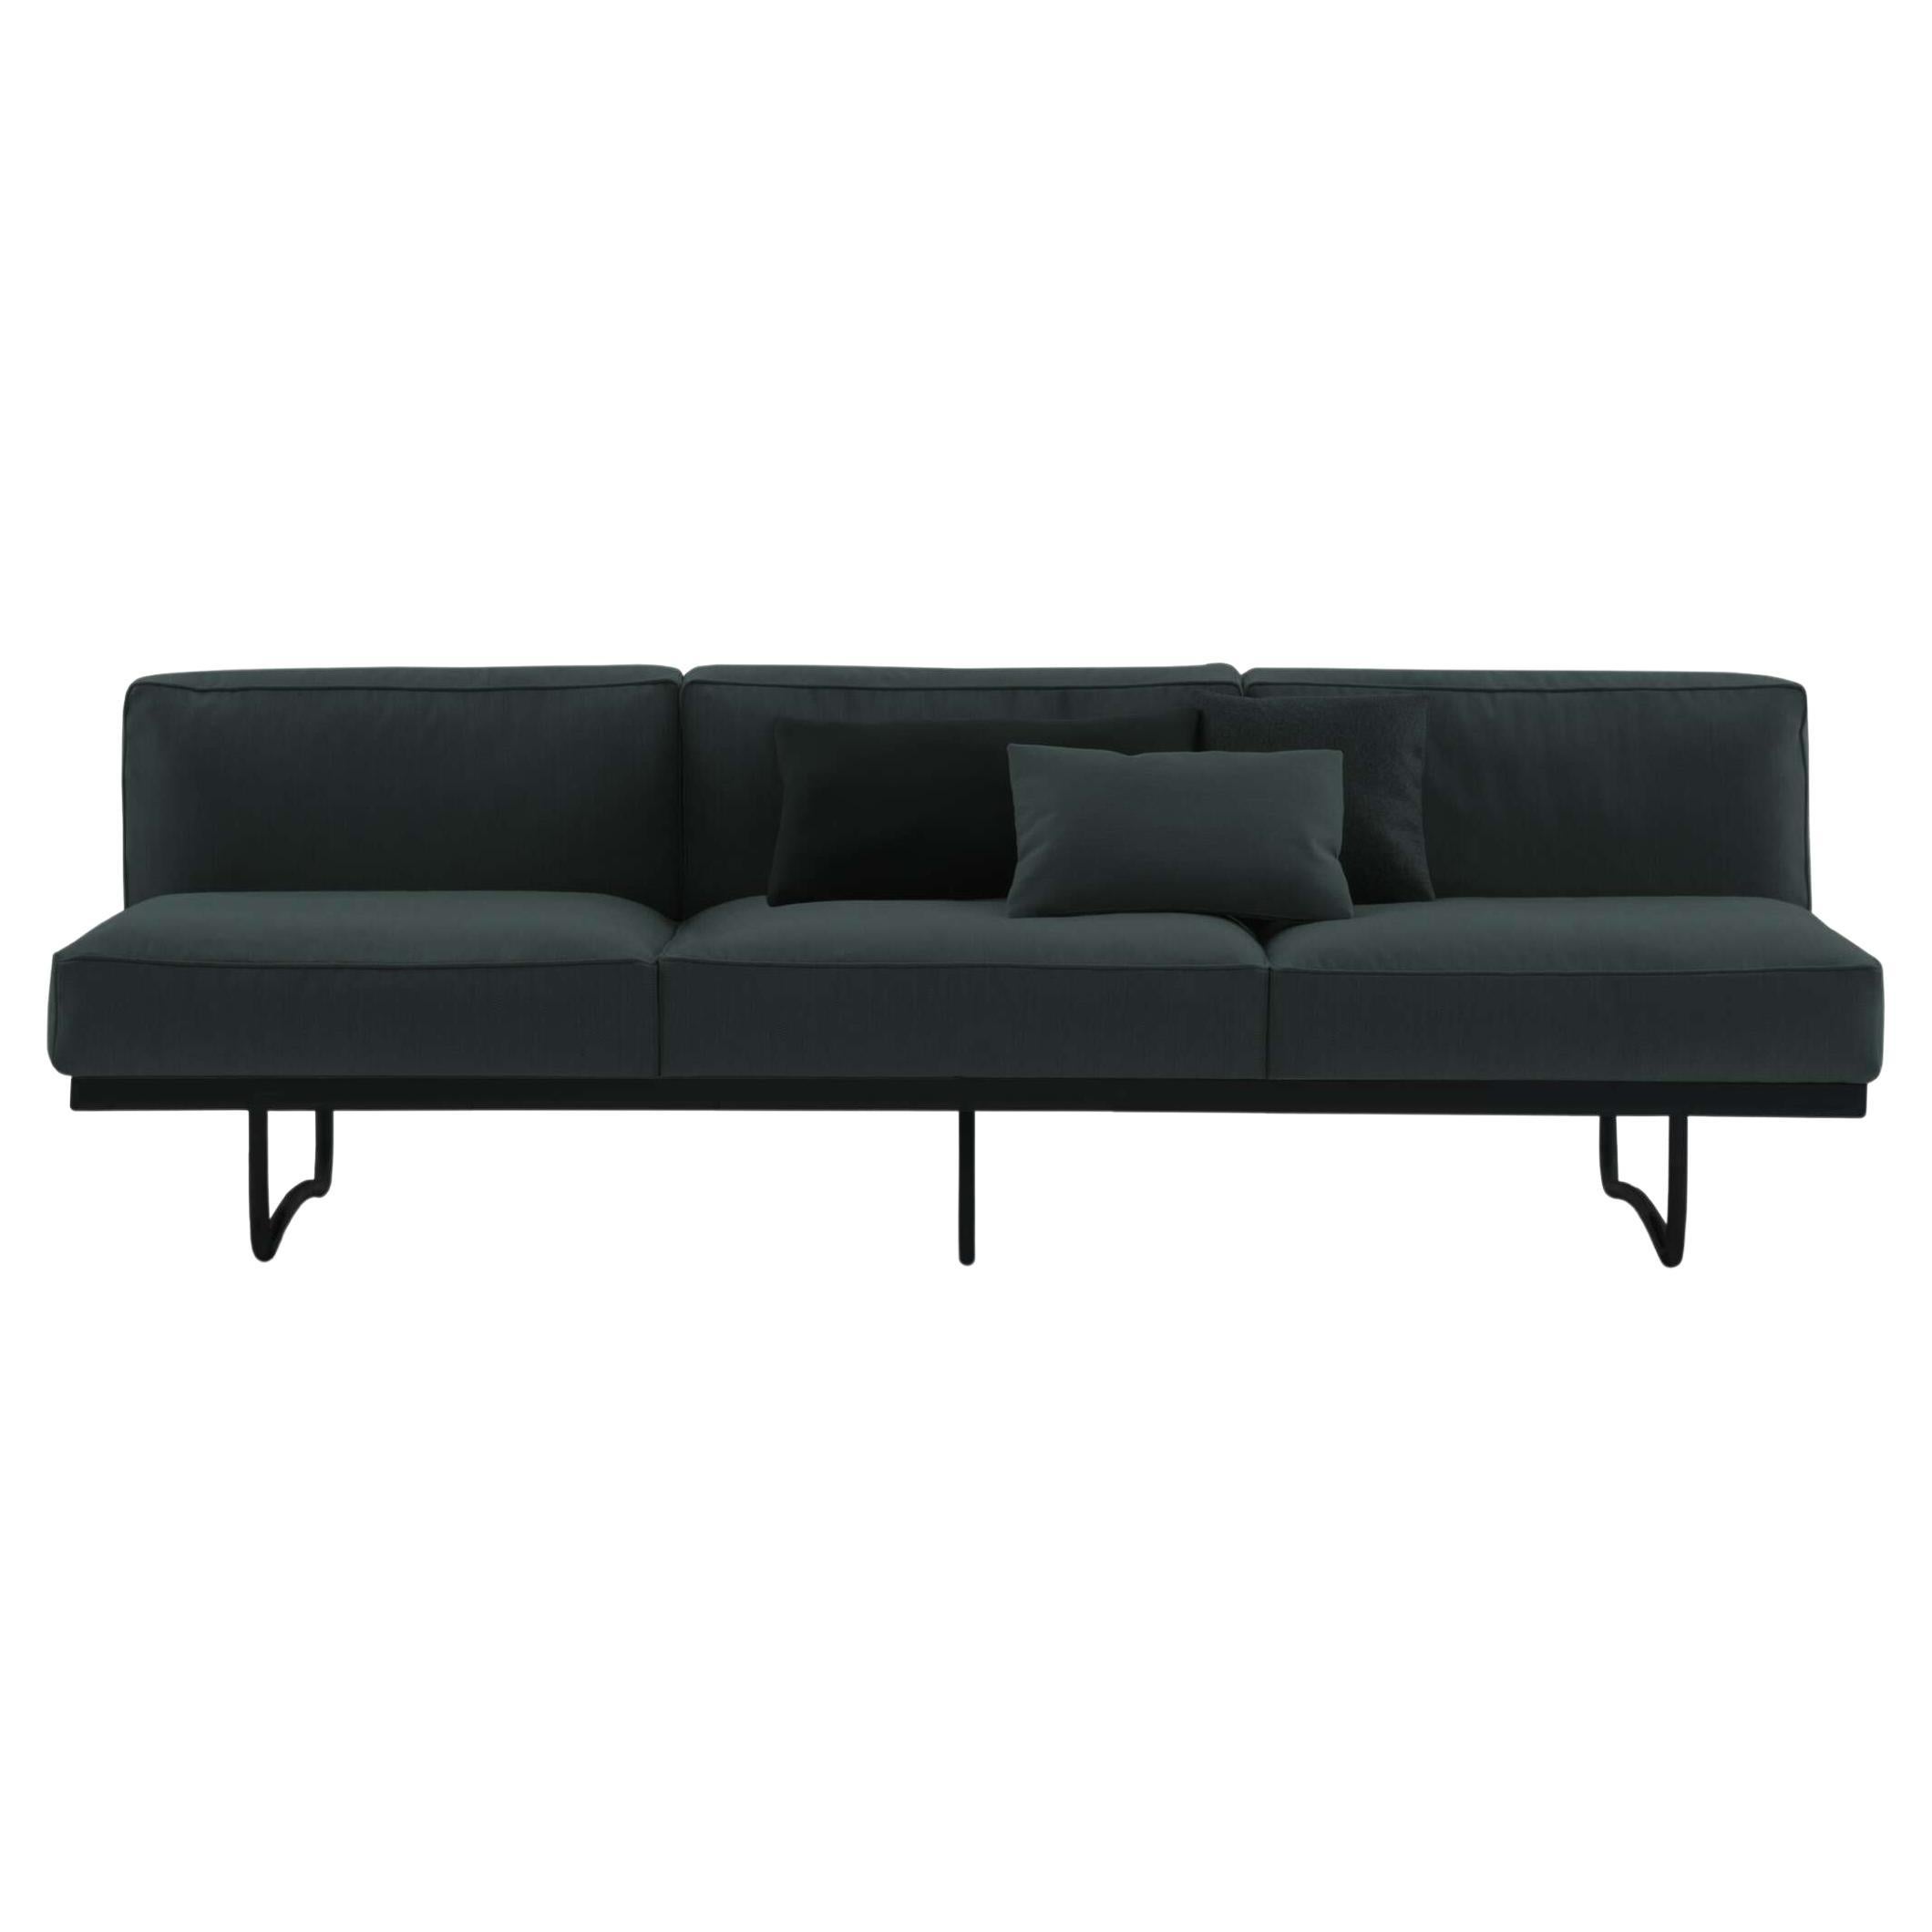 Le Corbusier 5 Canapé Sofa in Black or Petrol for Cassina, Italy - New  For Sale